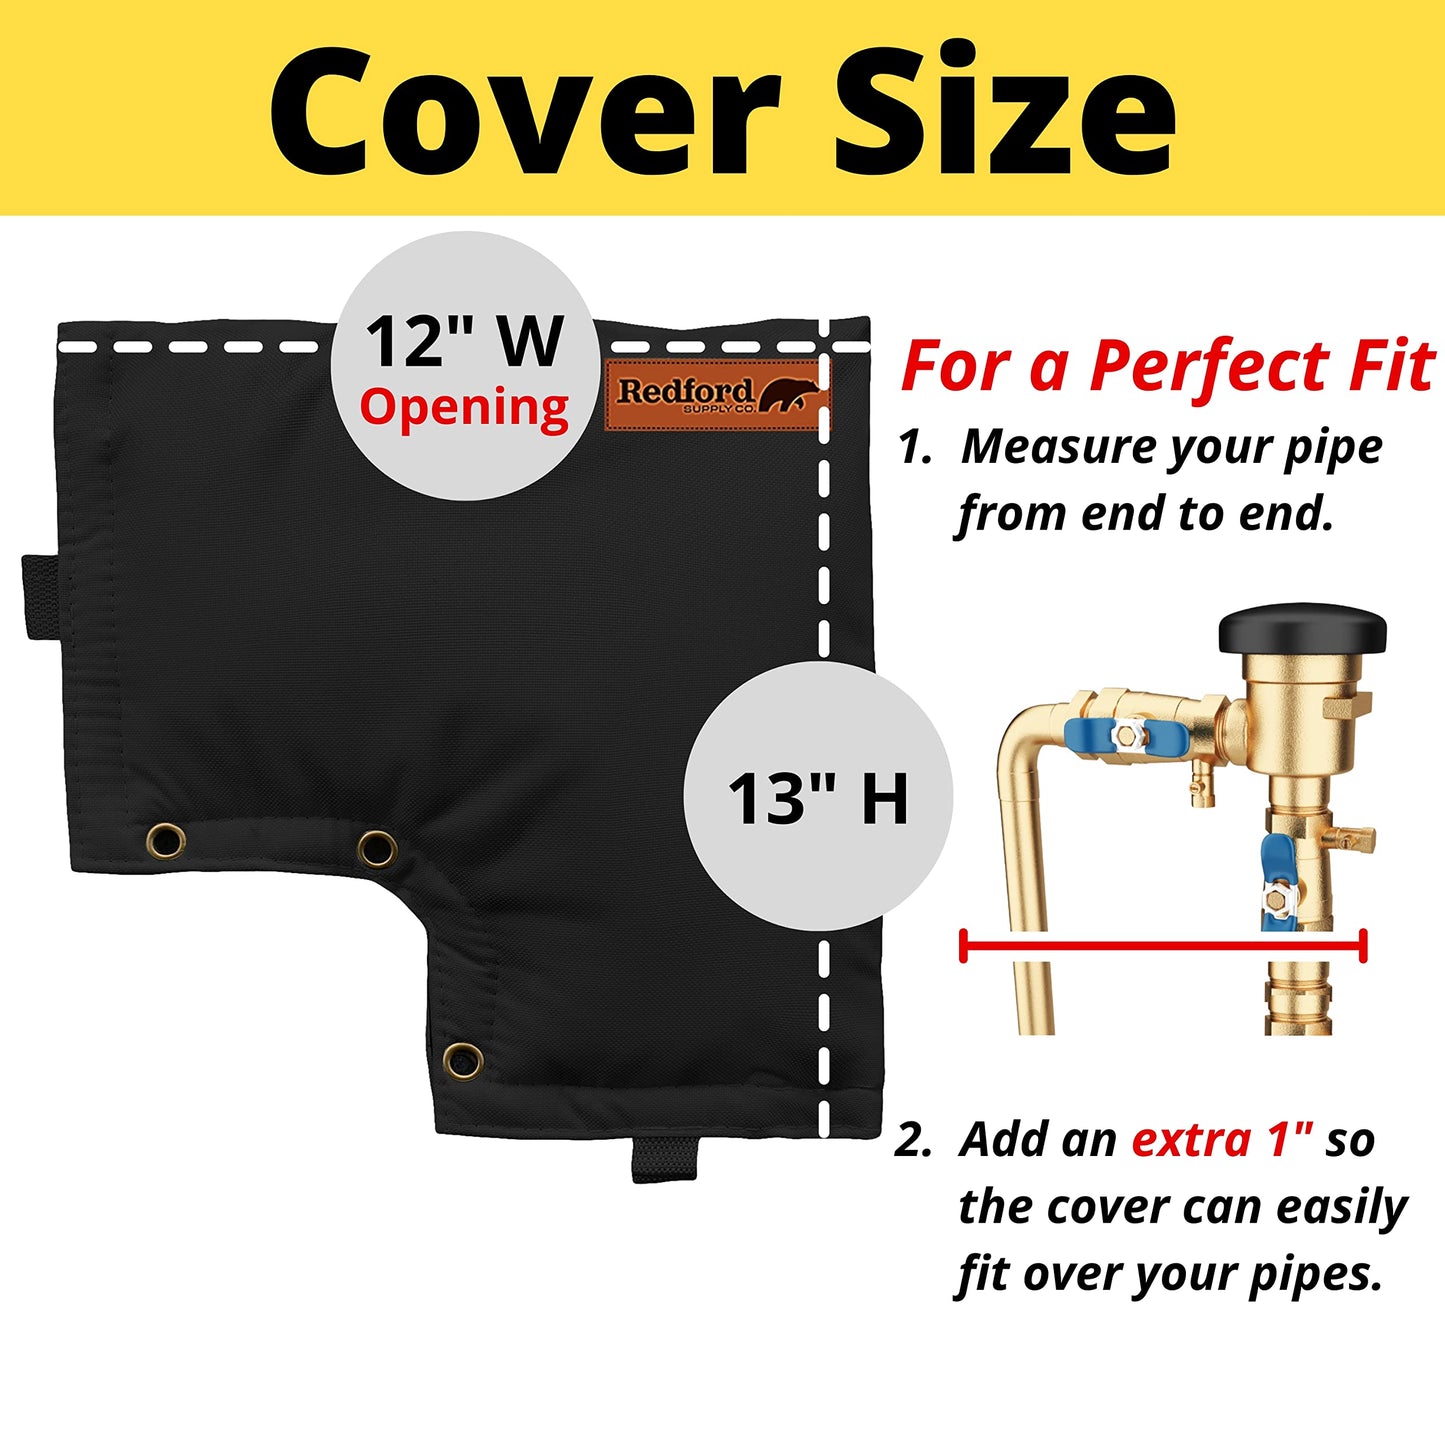 Redford Supply Co. Cold Snap (0°F) Double Wall Bell Cover - Water Well Pump Covers, Well Head Cover, Winter Pipe Cover, Sprinkler Valve Cover, Insulated Pouch, Pipe Insulation Bag (12"W x 13"H, Black)